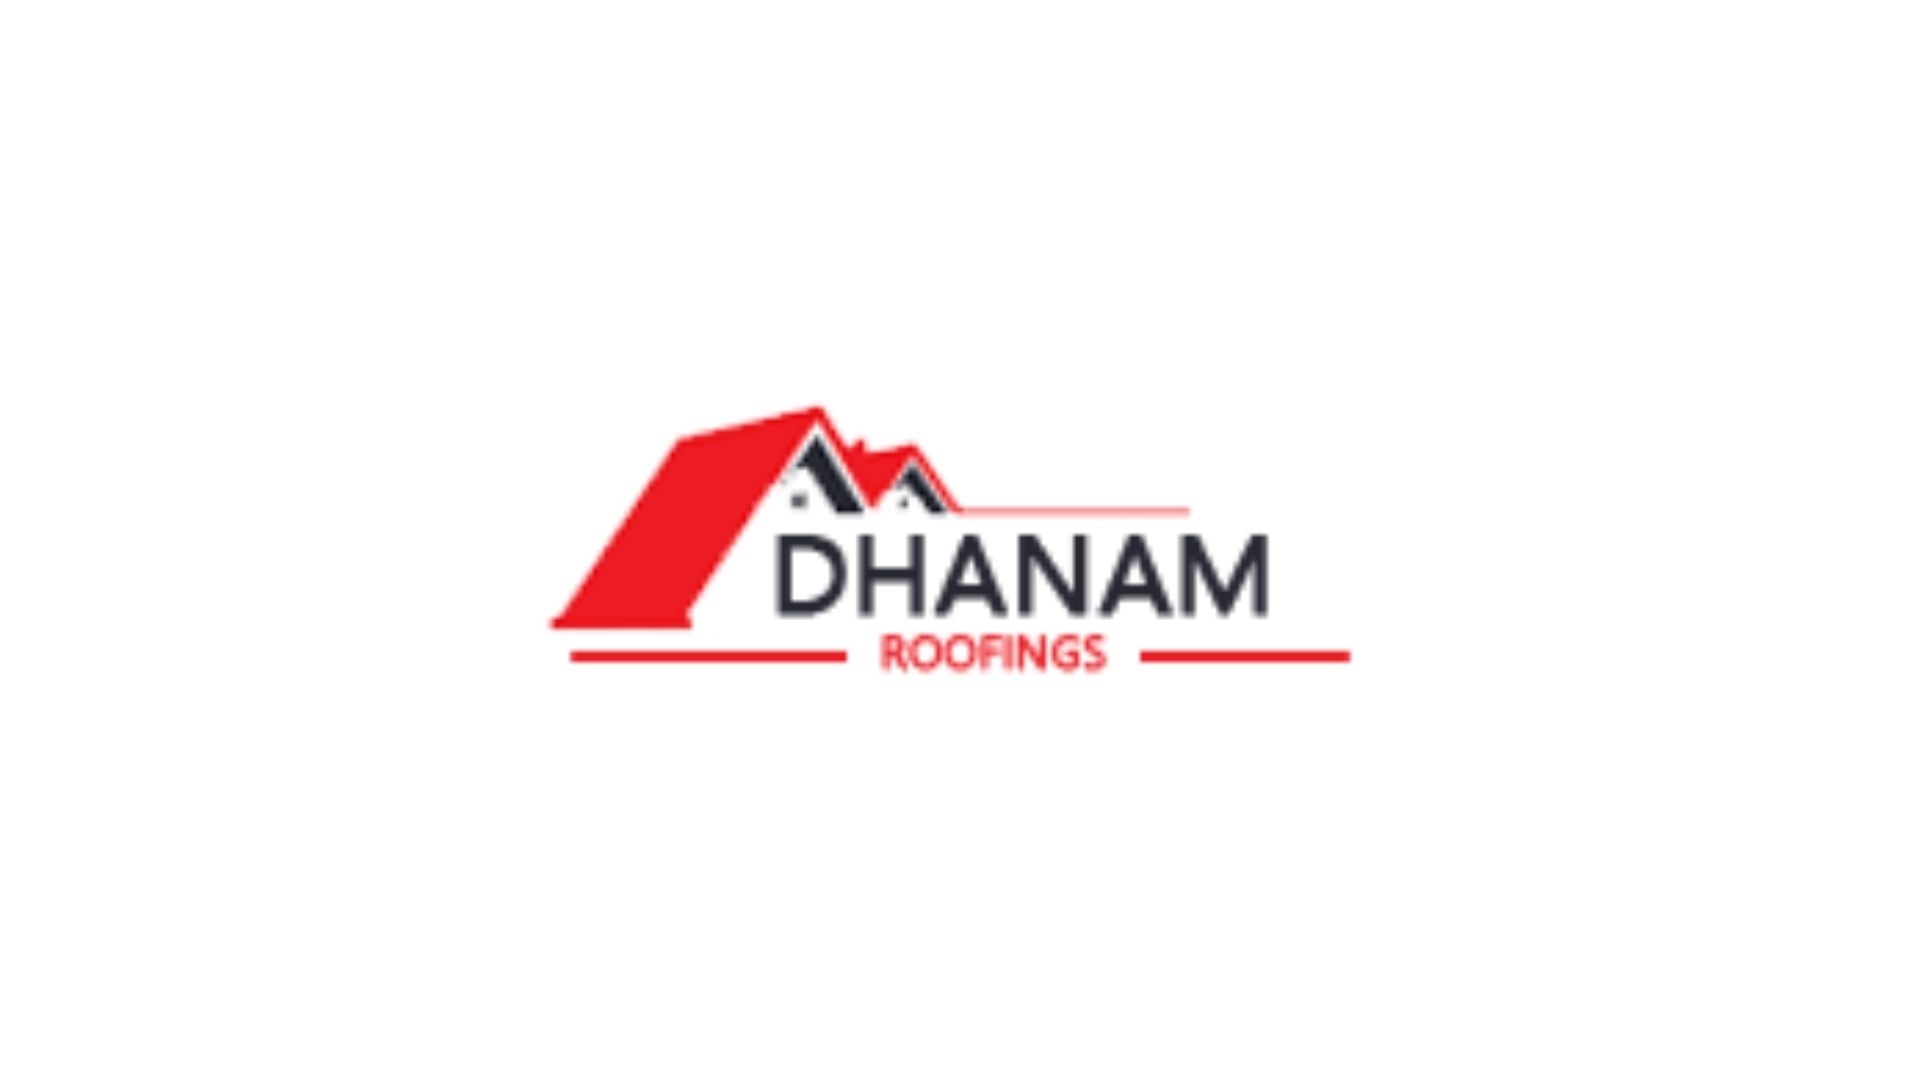  PUF Panel Roofing Manufacturer and Supplier in Chennai - Dhanamroofings